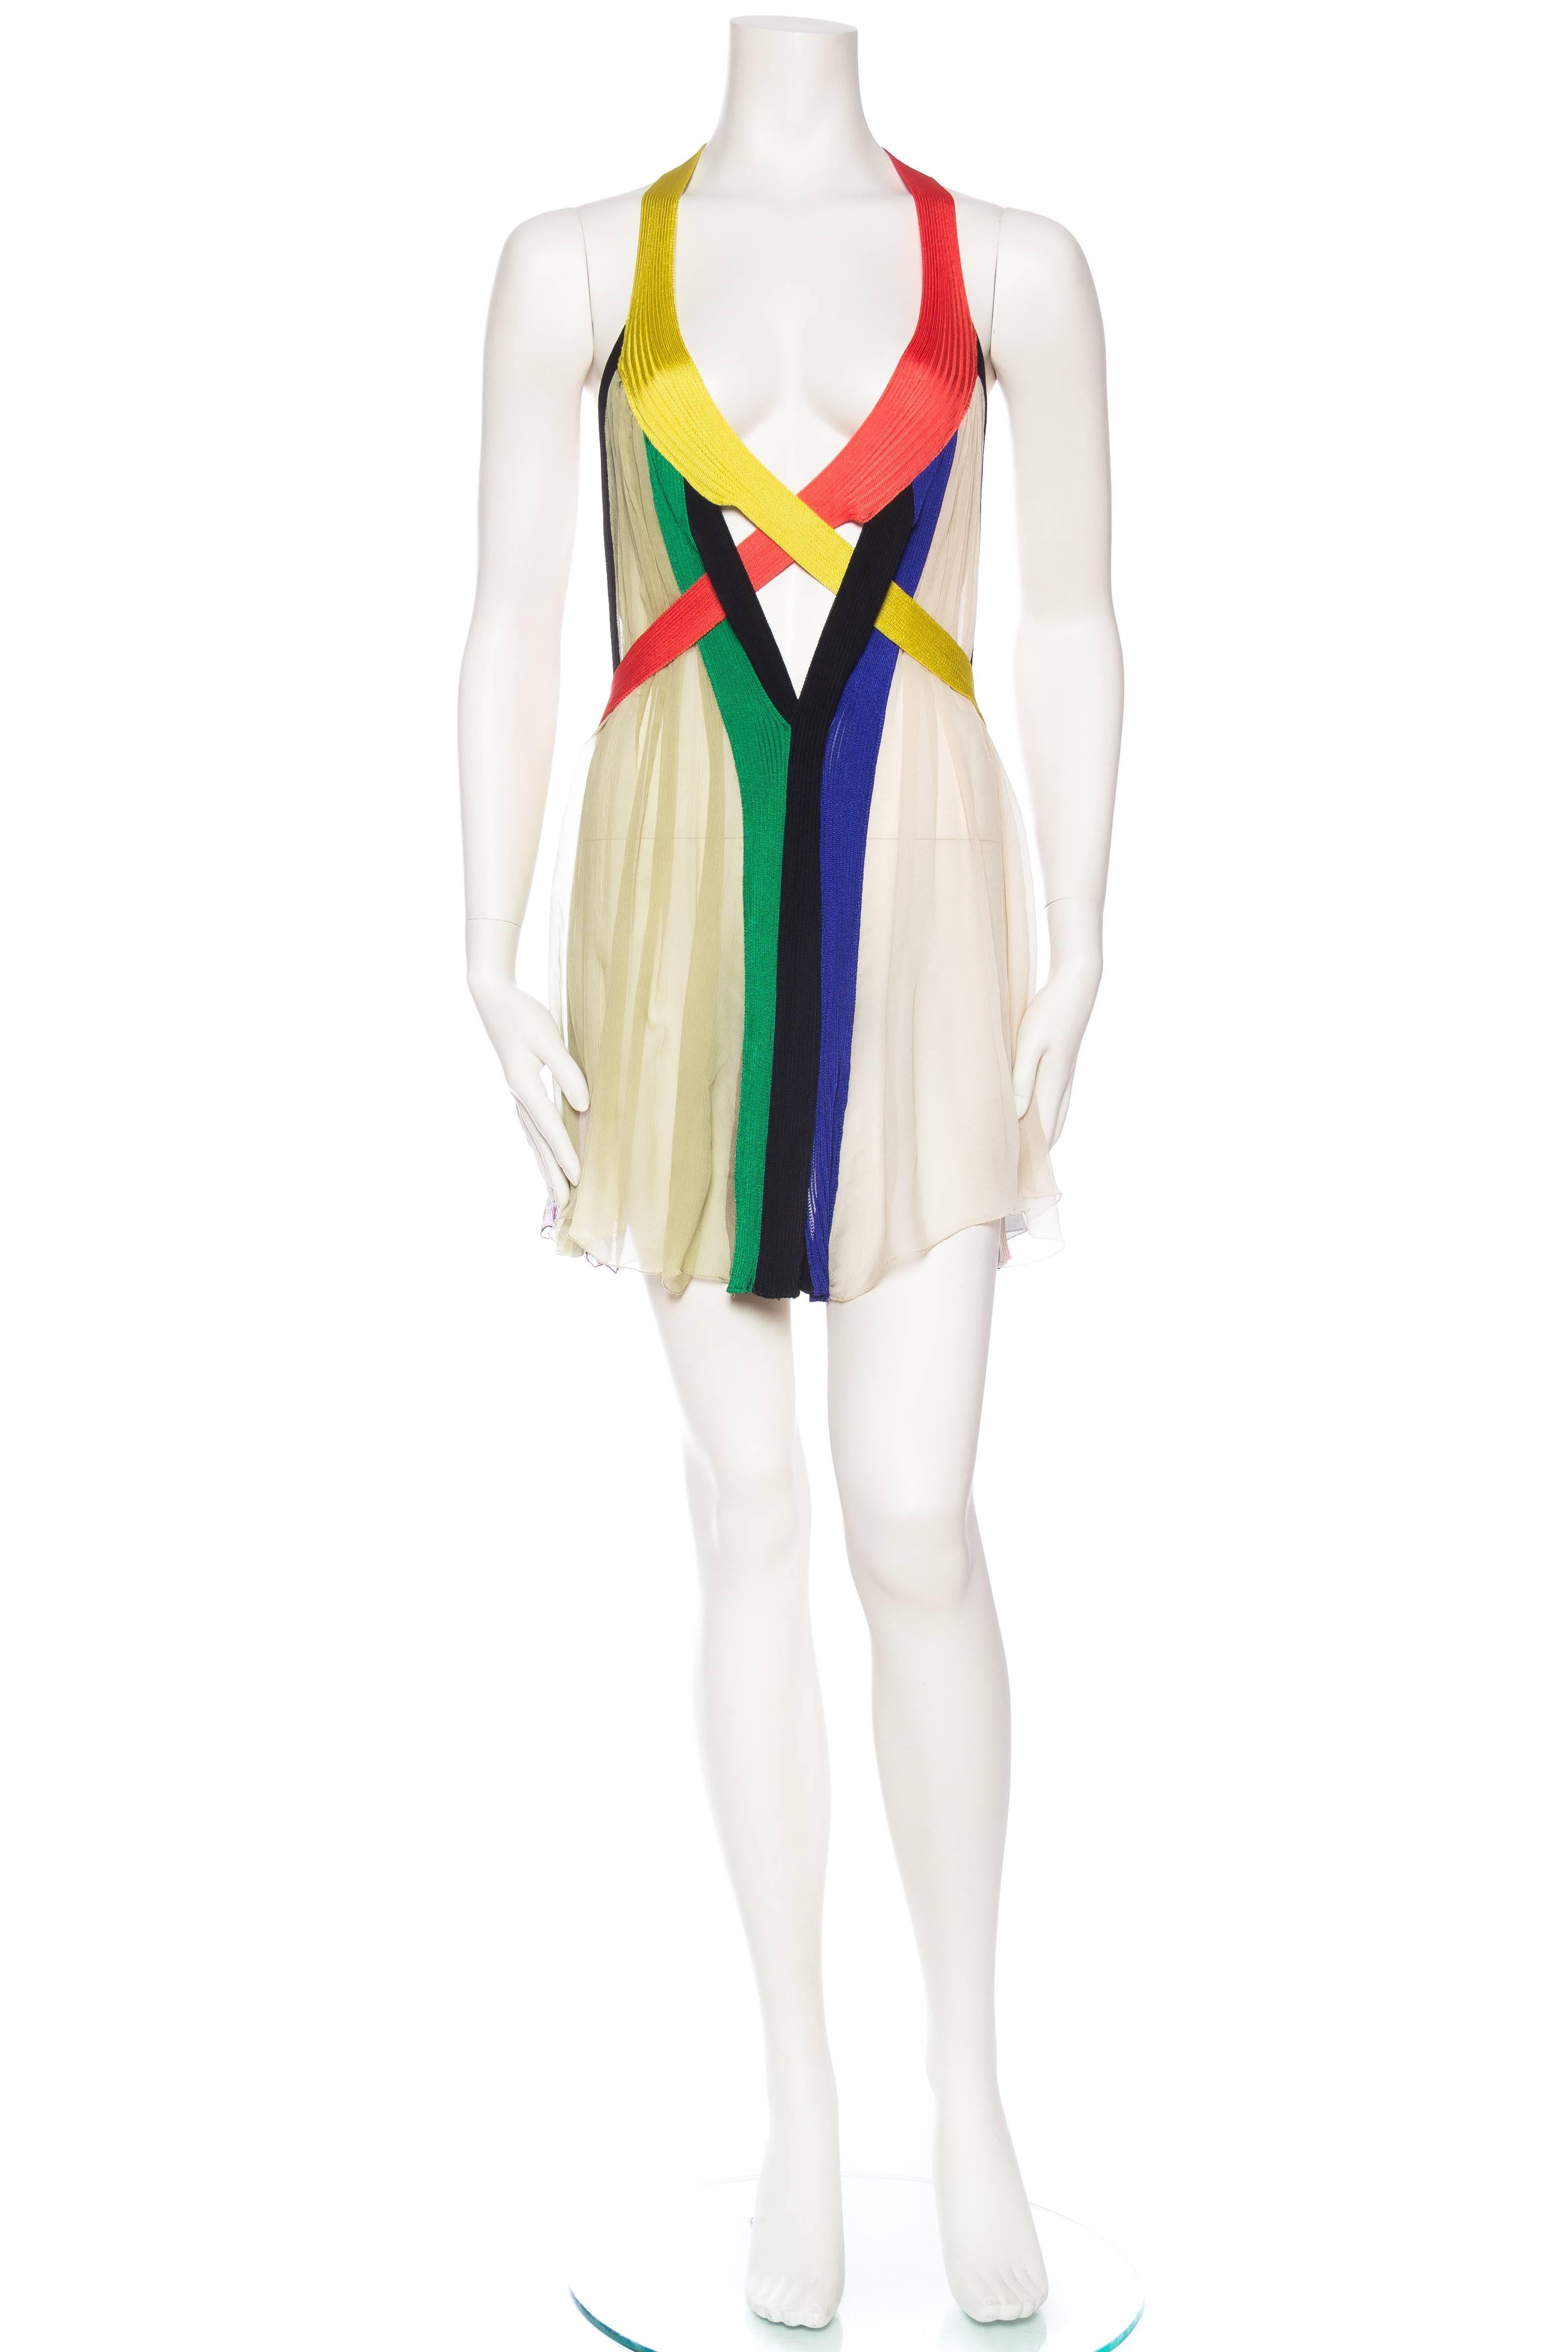 Genius, strips of soft knit and panels of silk chiffon are all Jean Paul Gaultier  has used to create this masterpiece of a dress. Most likely meant as a layering piece as it is sheer and revealing. Works great both with a bikini as well as one of